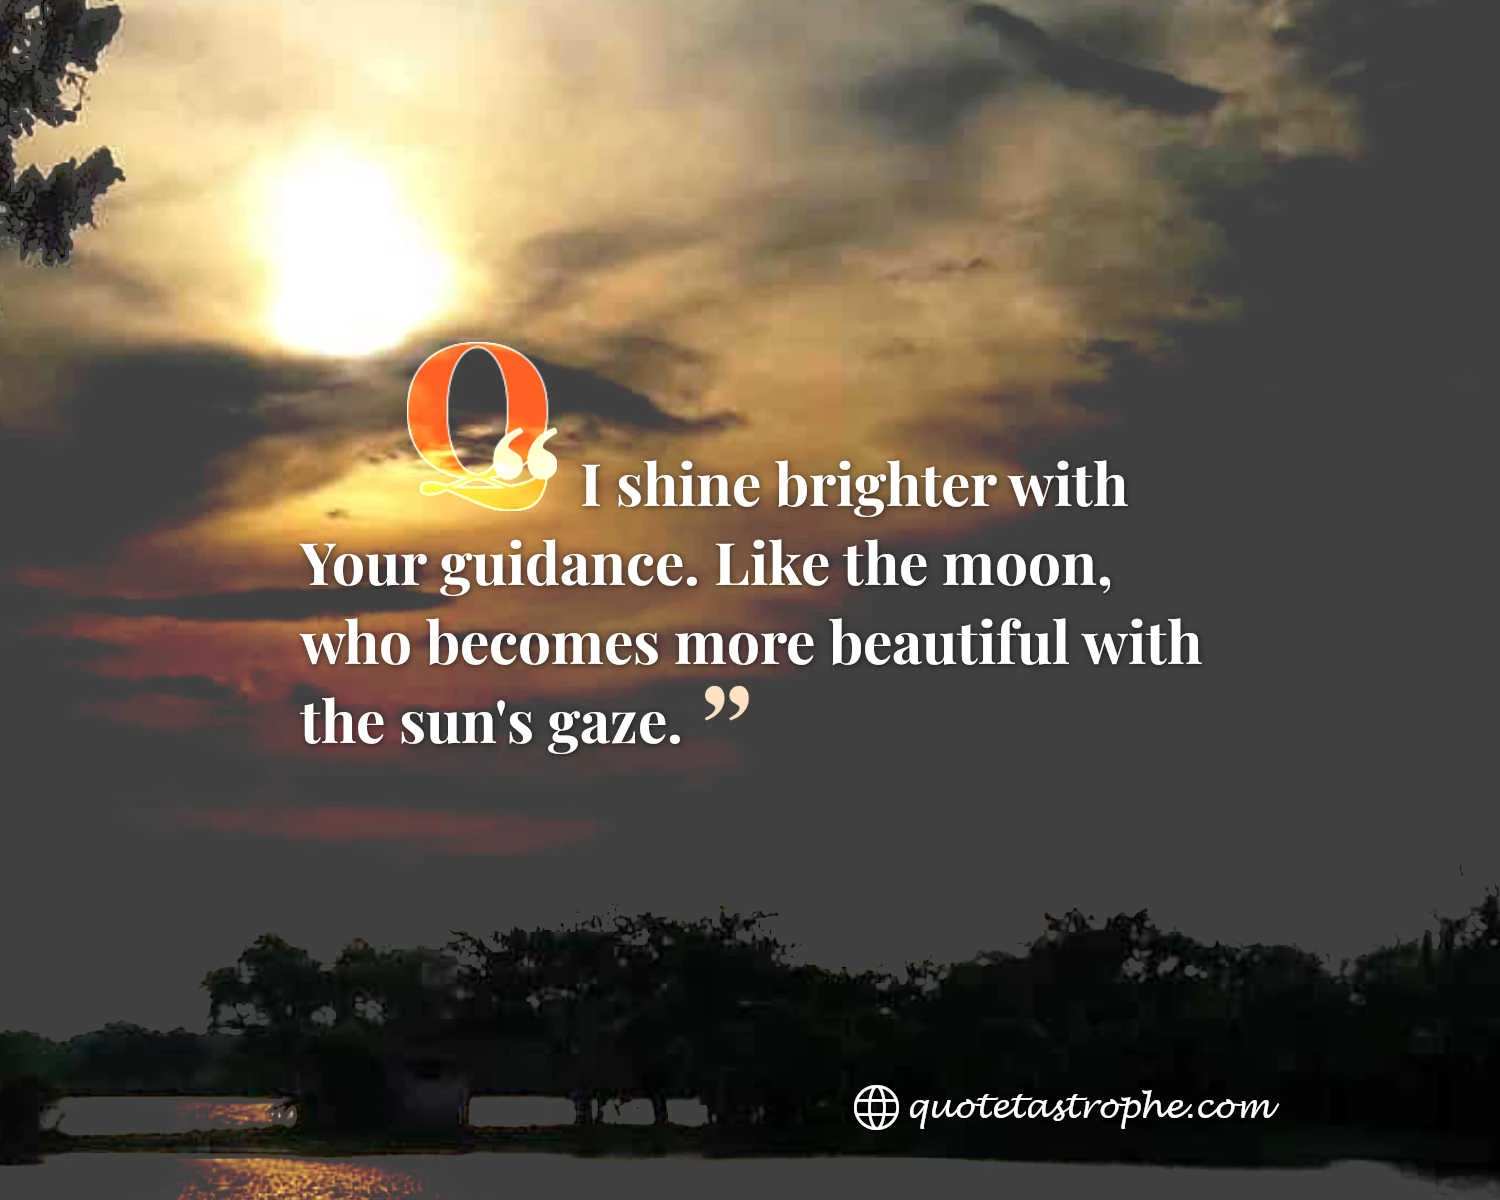 I Shine Brighter With Your Guidance